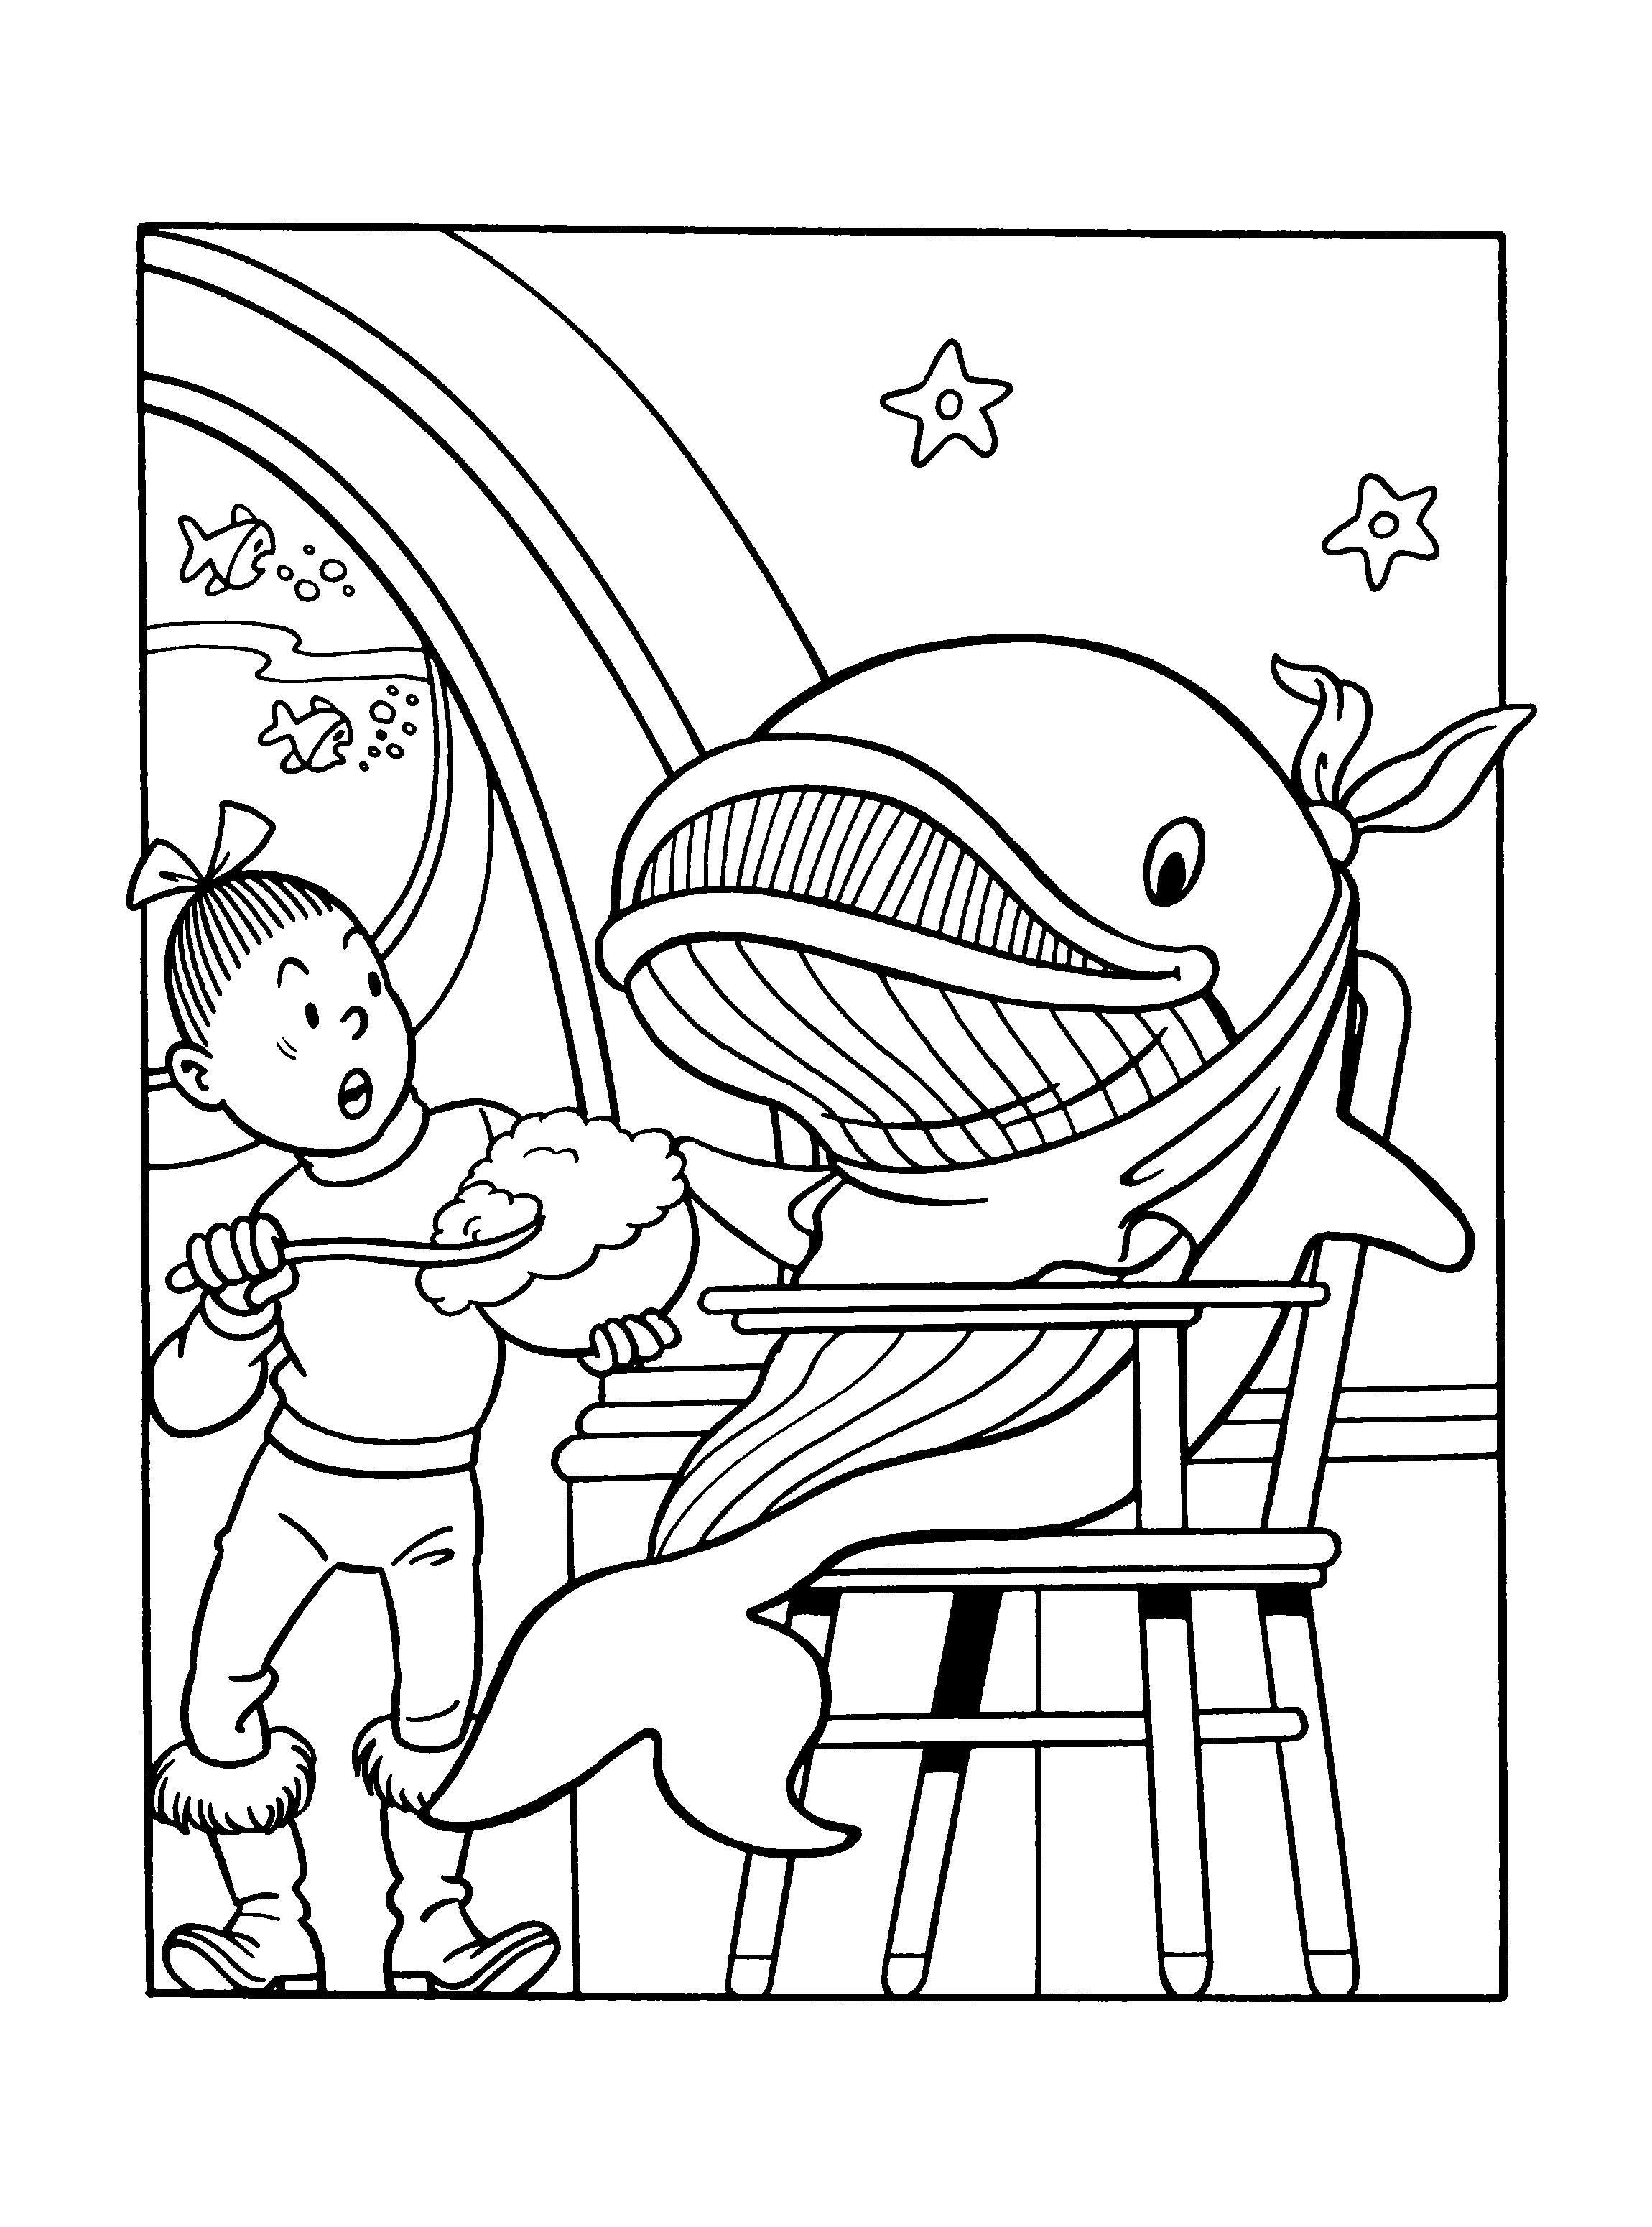 Coloring Page - Spike and suzy coloring pages 55